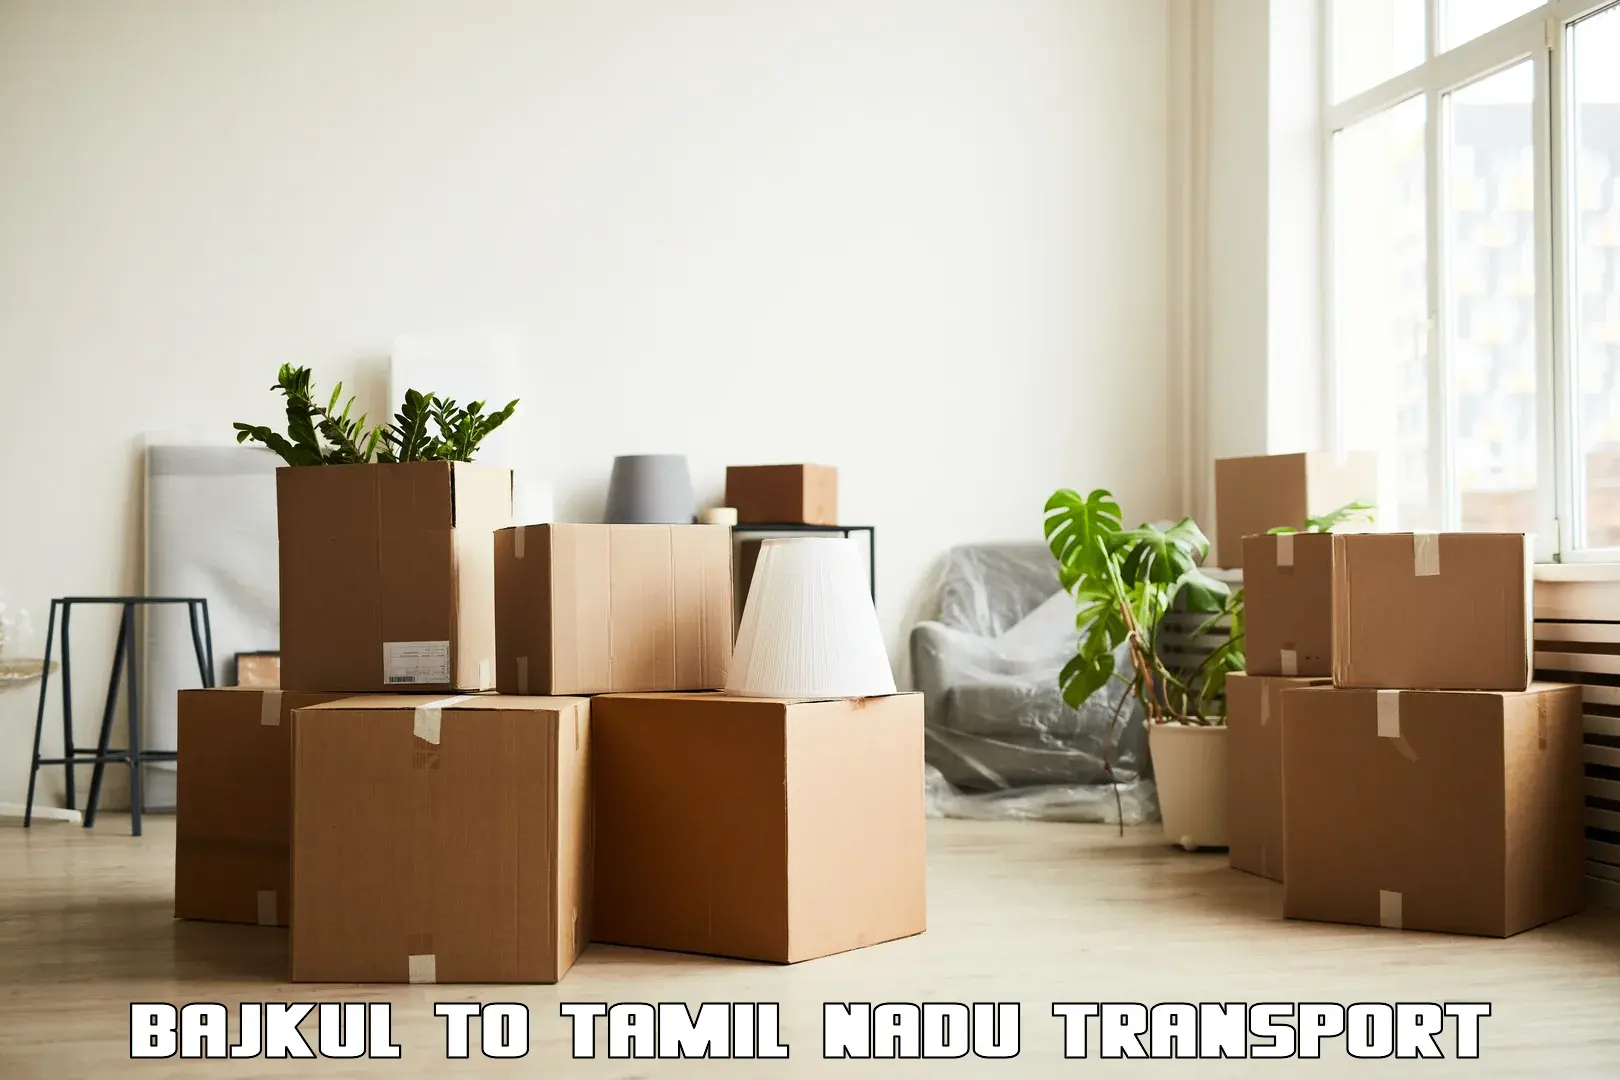 Truck transport companies in India in Bajkul to Ennore Port Chennai